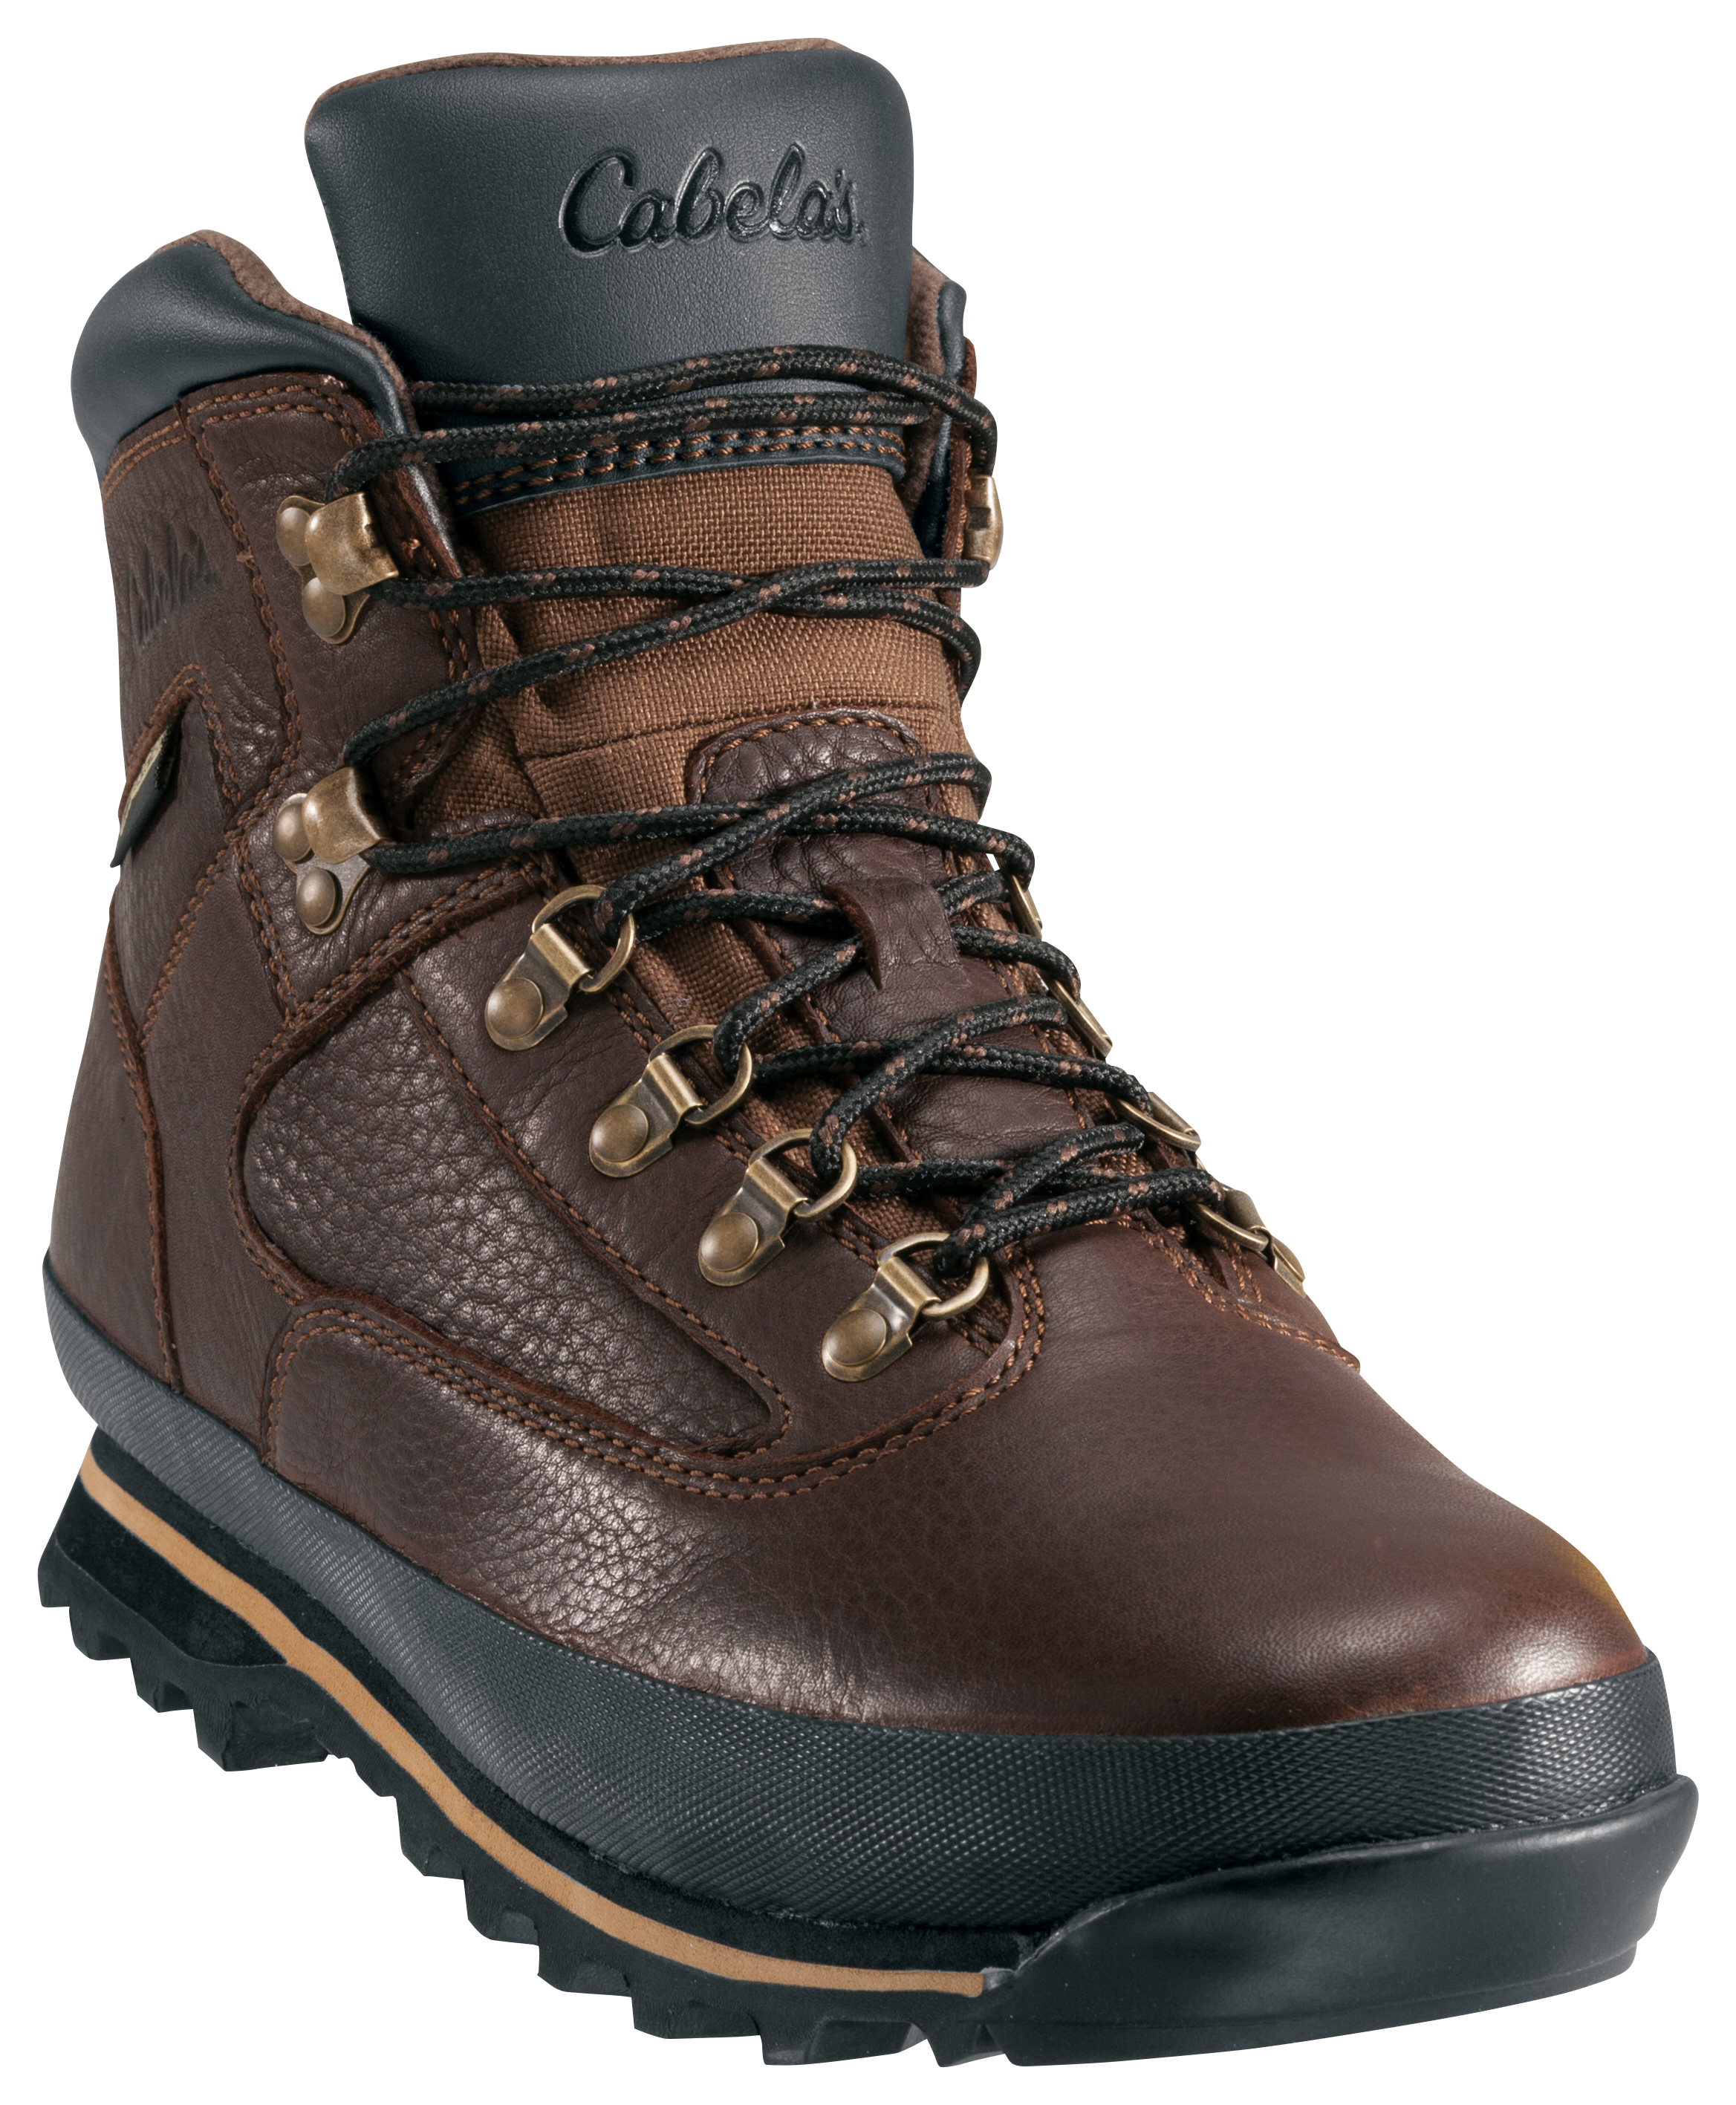 Cabela's Rimrock Mid GORE-TEX Hiking Boots for Men - Brown - 13M